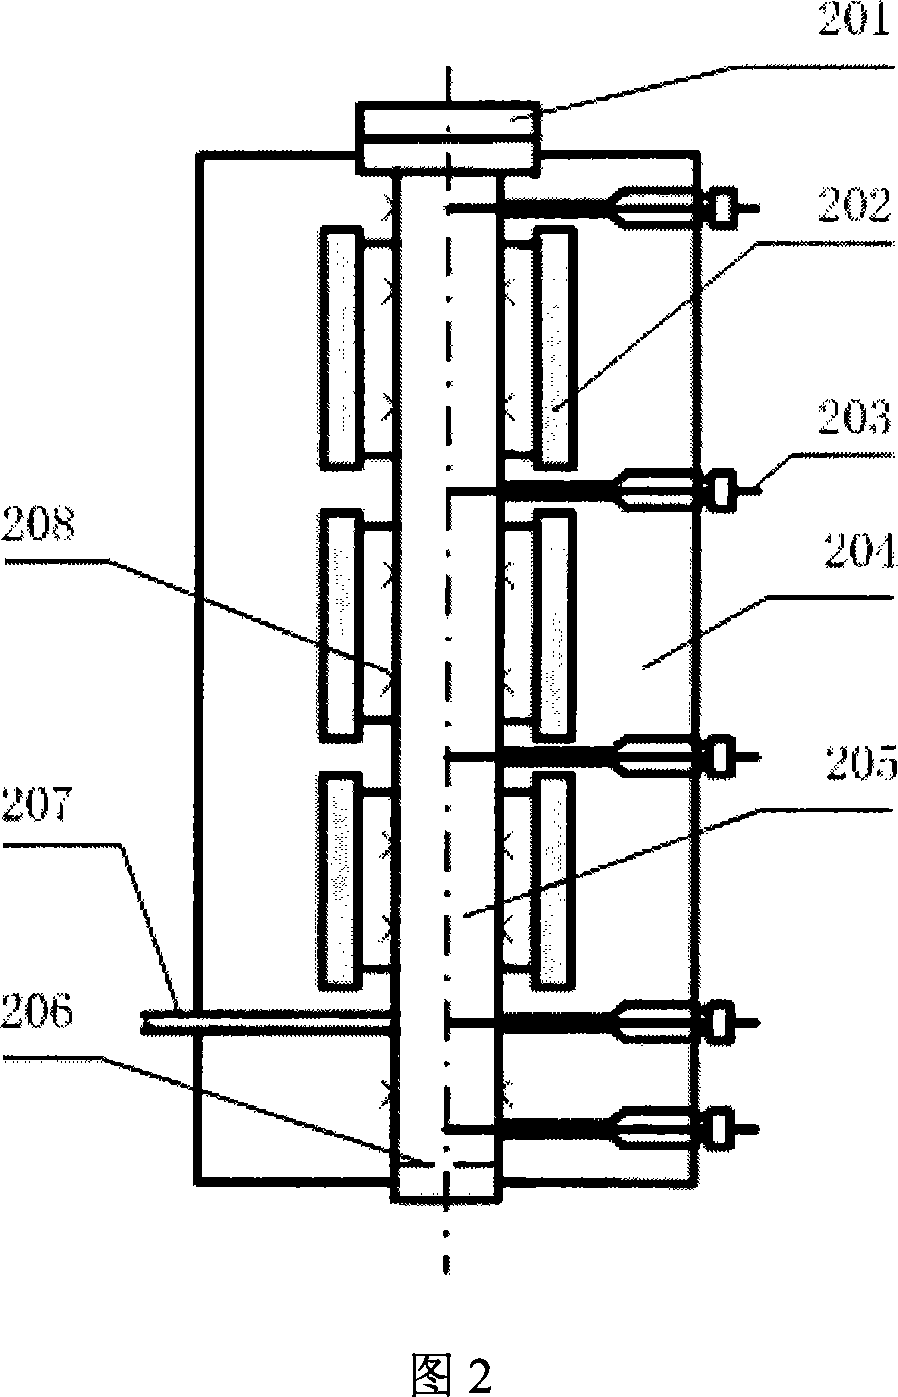 Biomass castoff supercritical water fluid bed partial oxidation hydrogen-preparation device and method